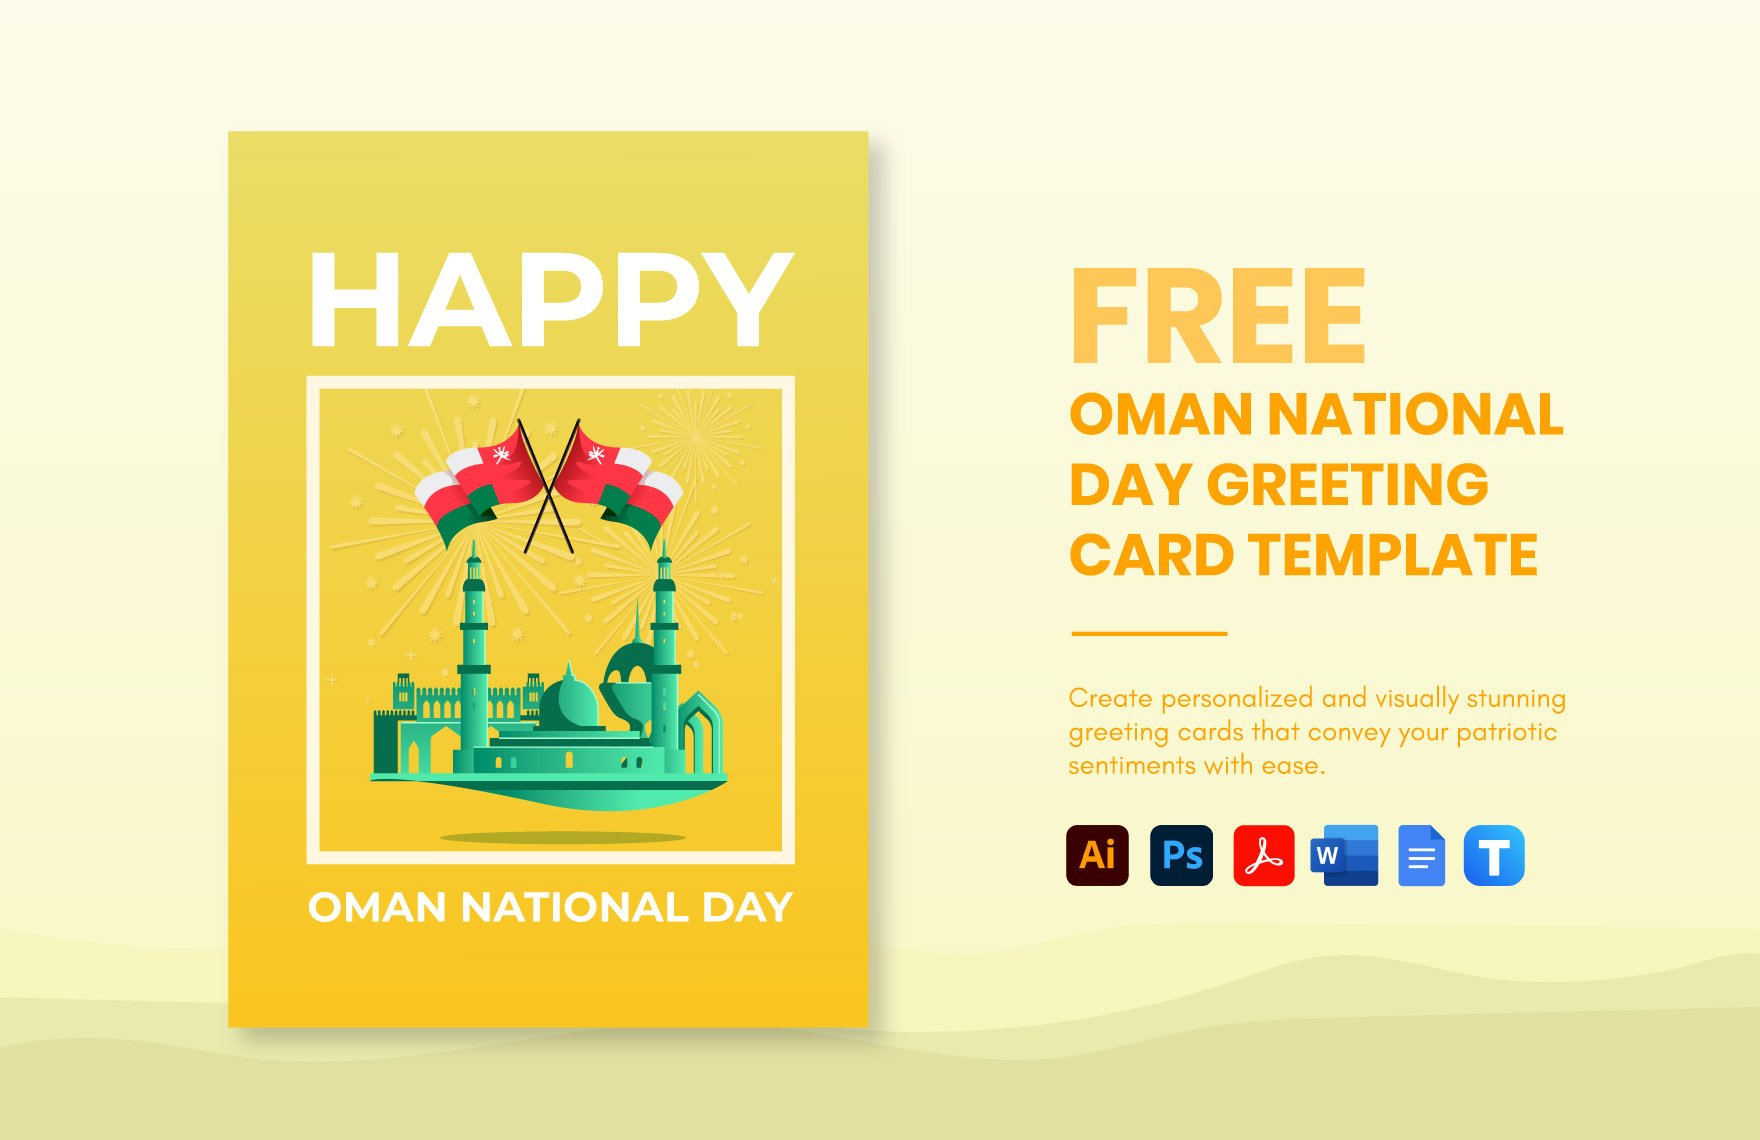 Oman National Day Greeting Card Template